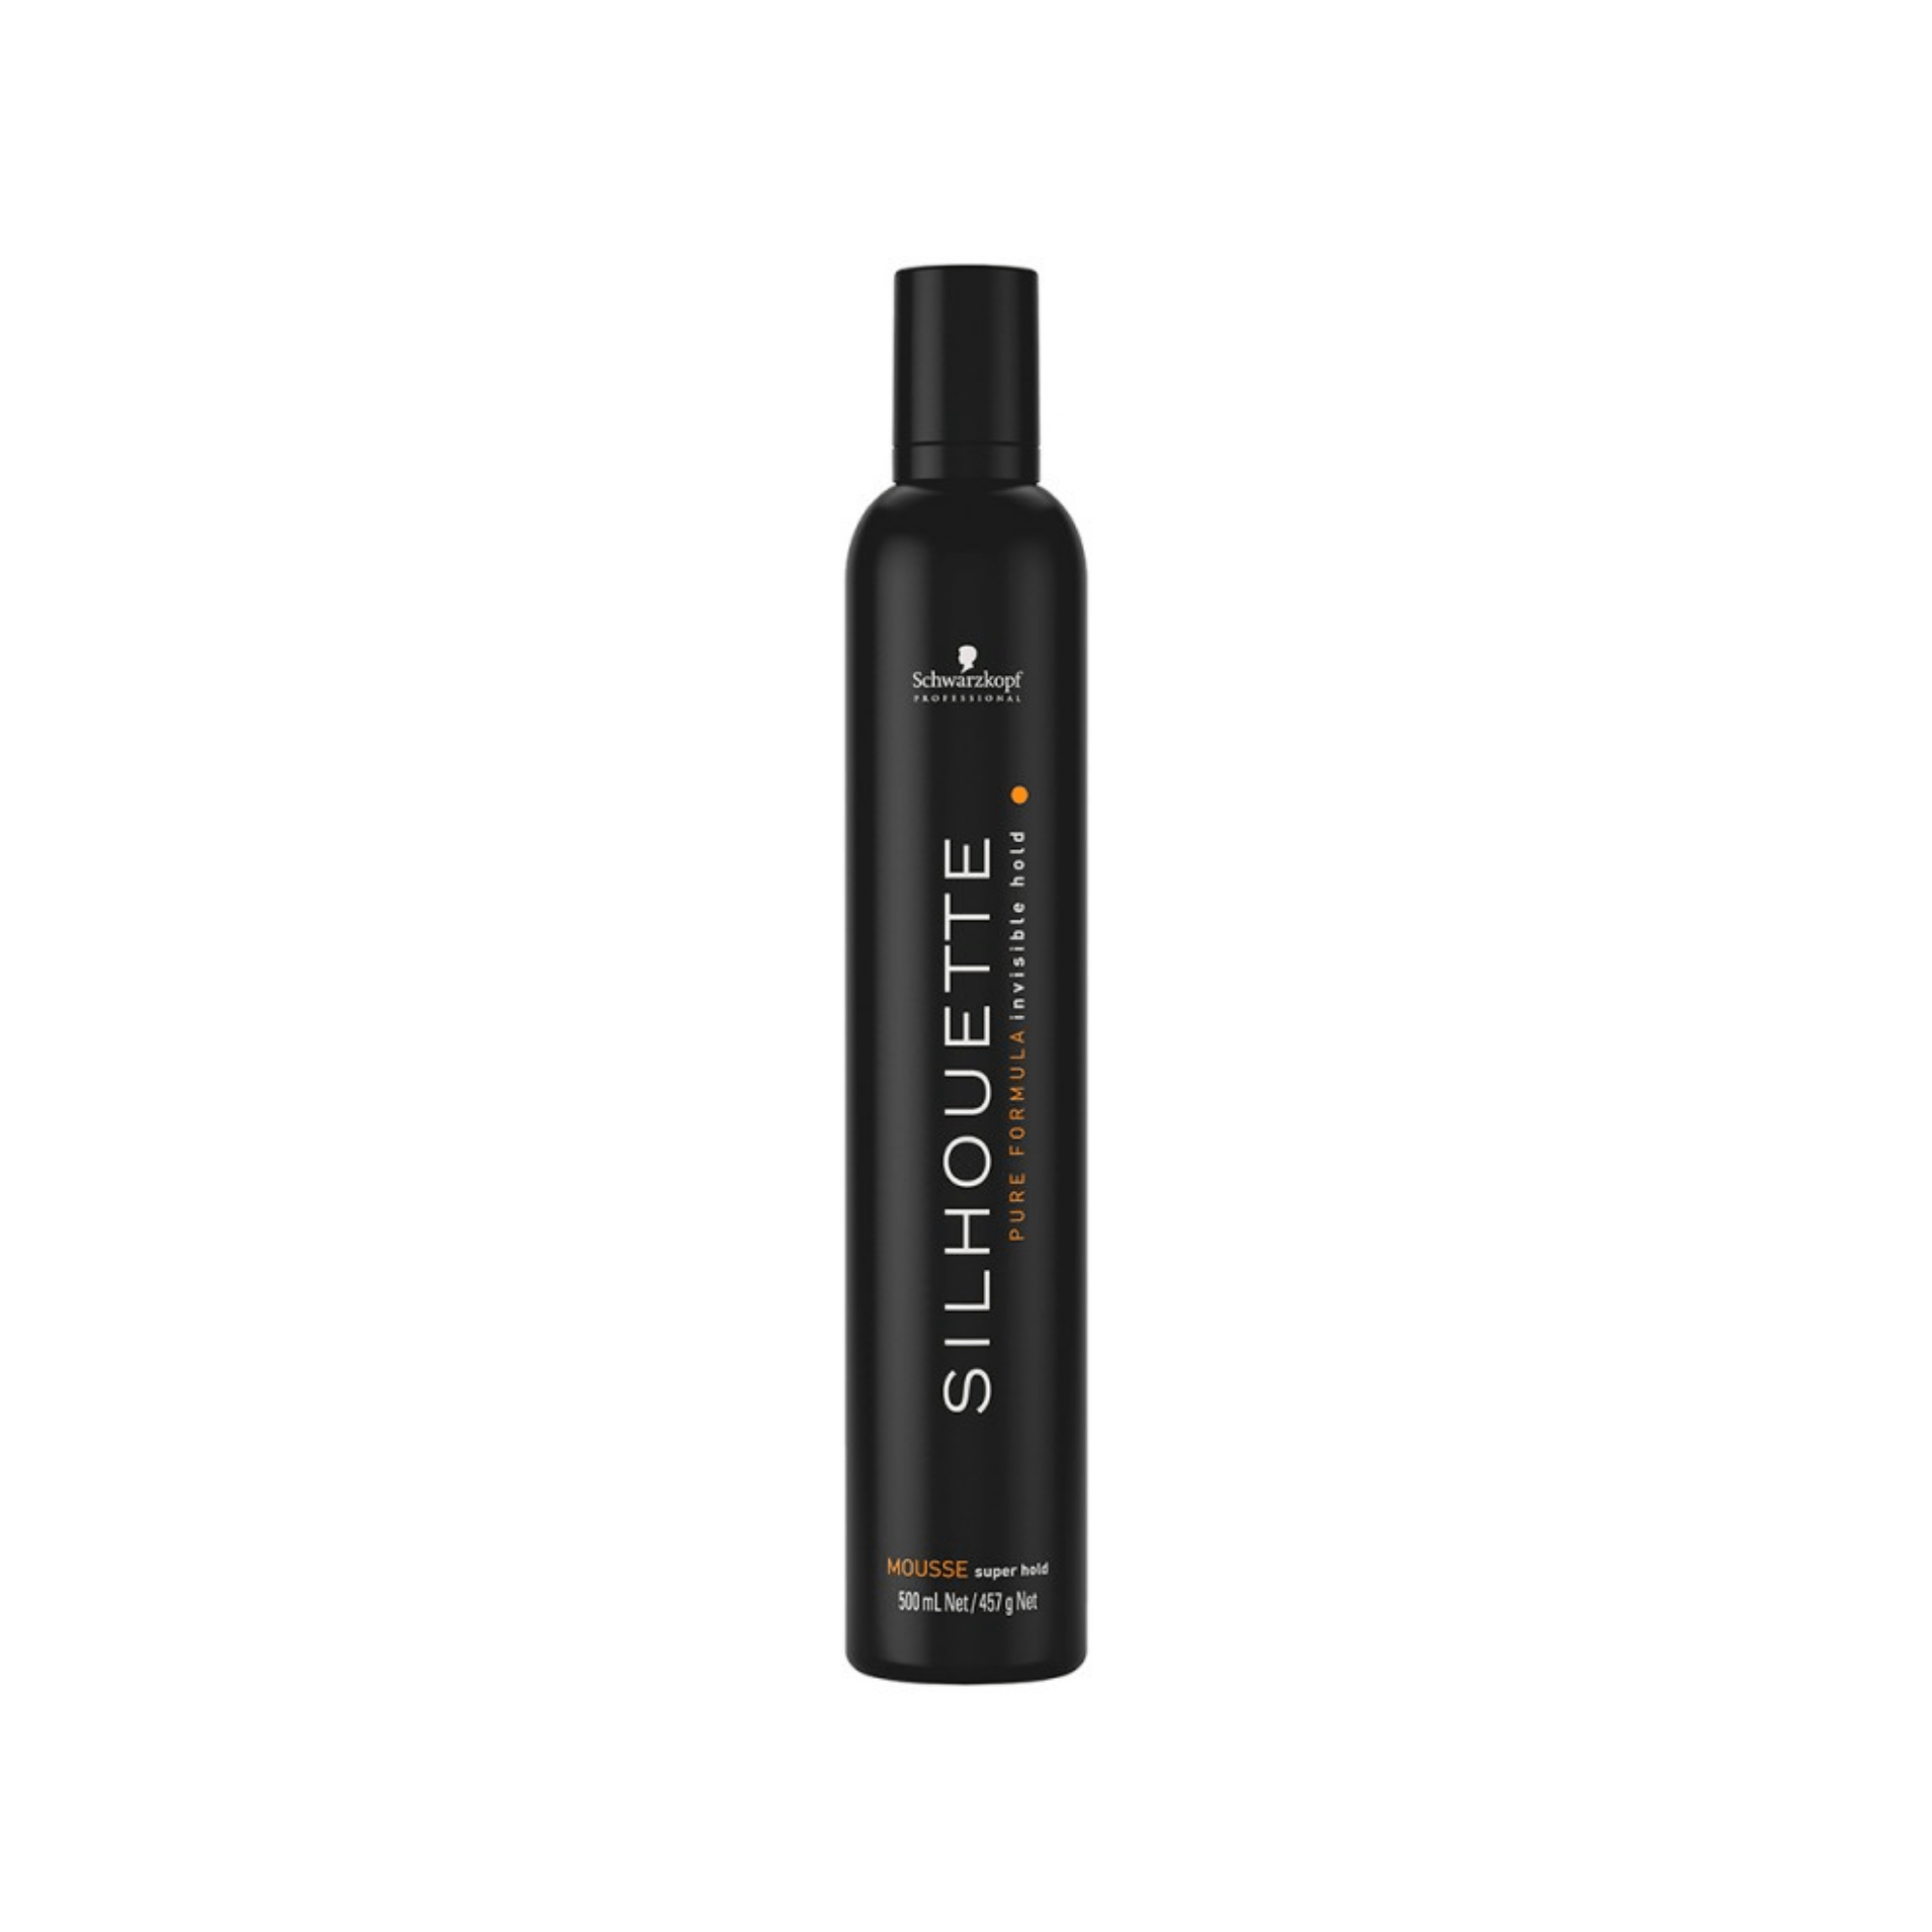 Silhouette Styling SUPER HOLD Mousse 500ml Roberta Beauty Club